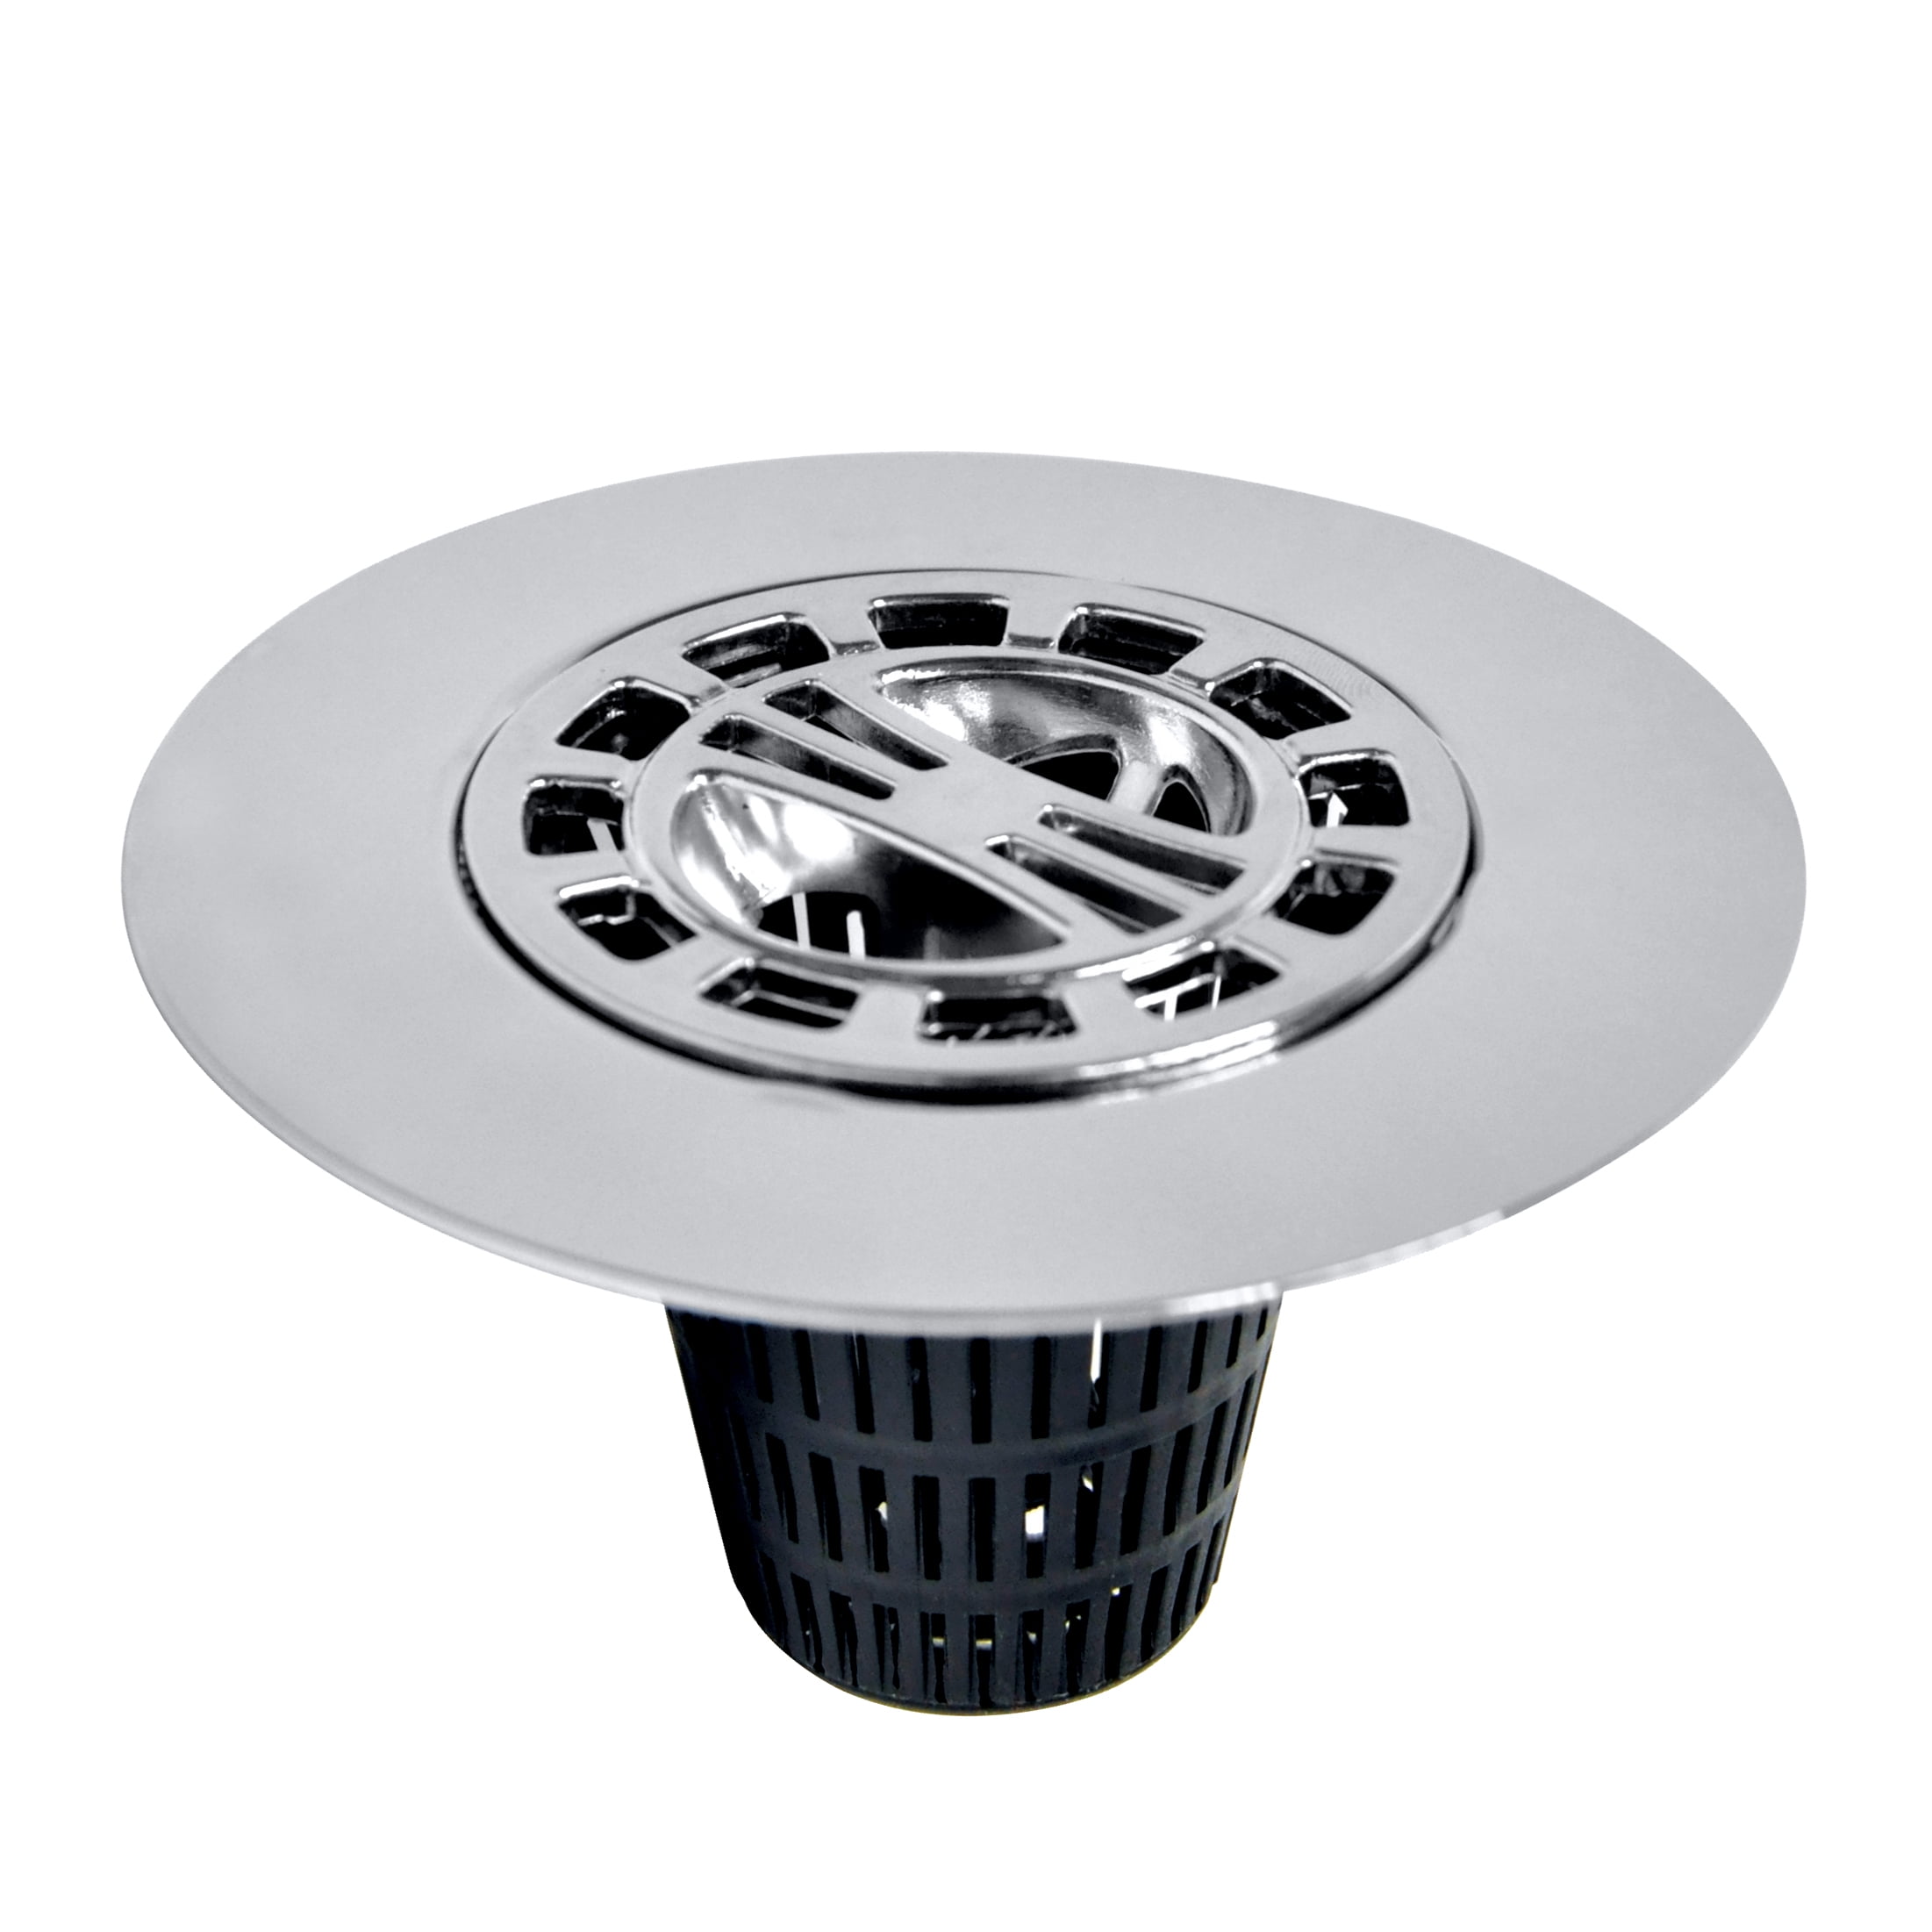 TSWHT454 Tubshroom Tub Drain Protector for sale online White 